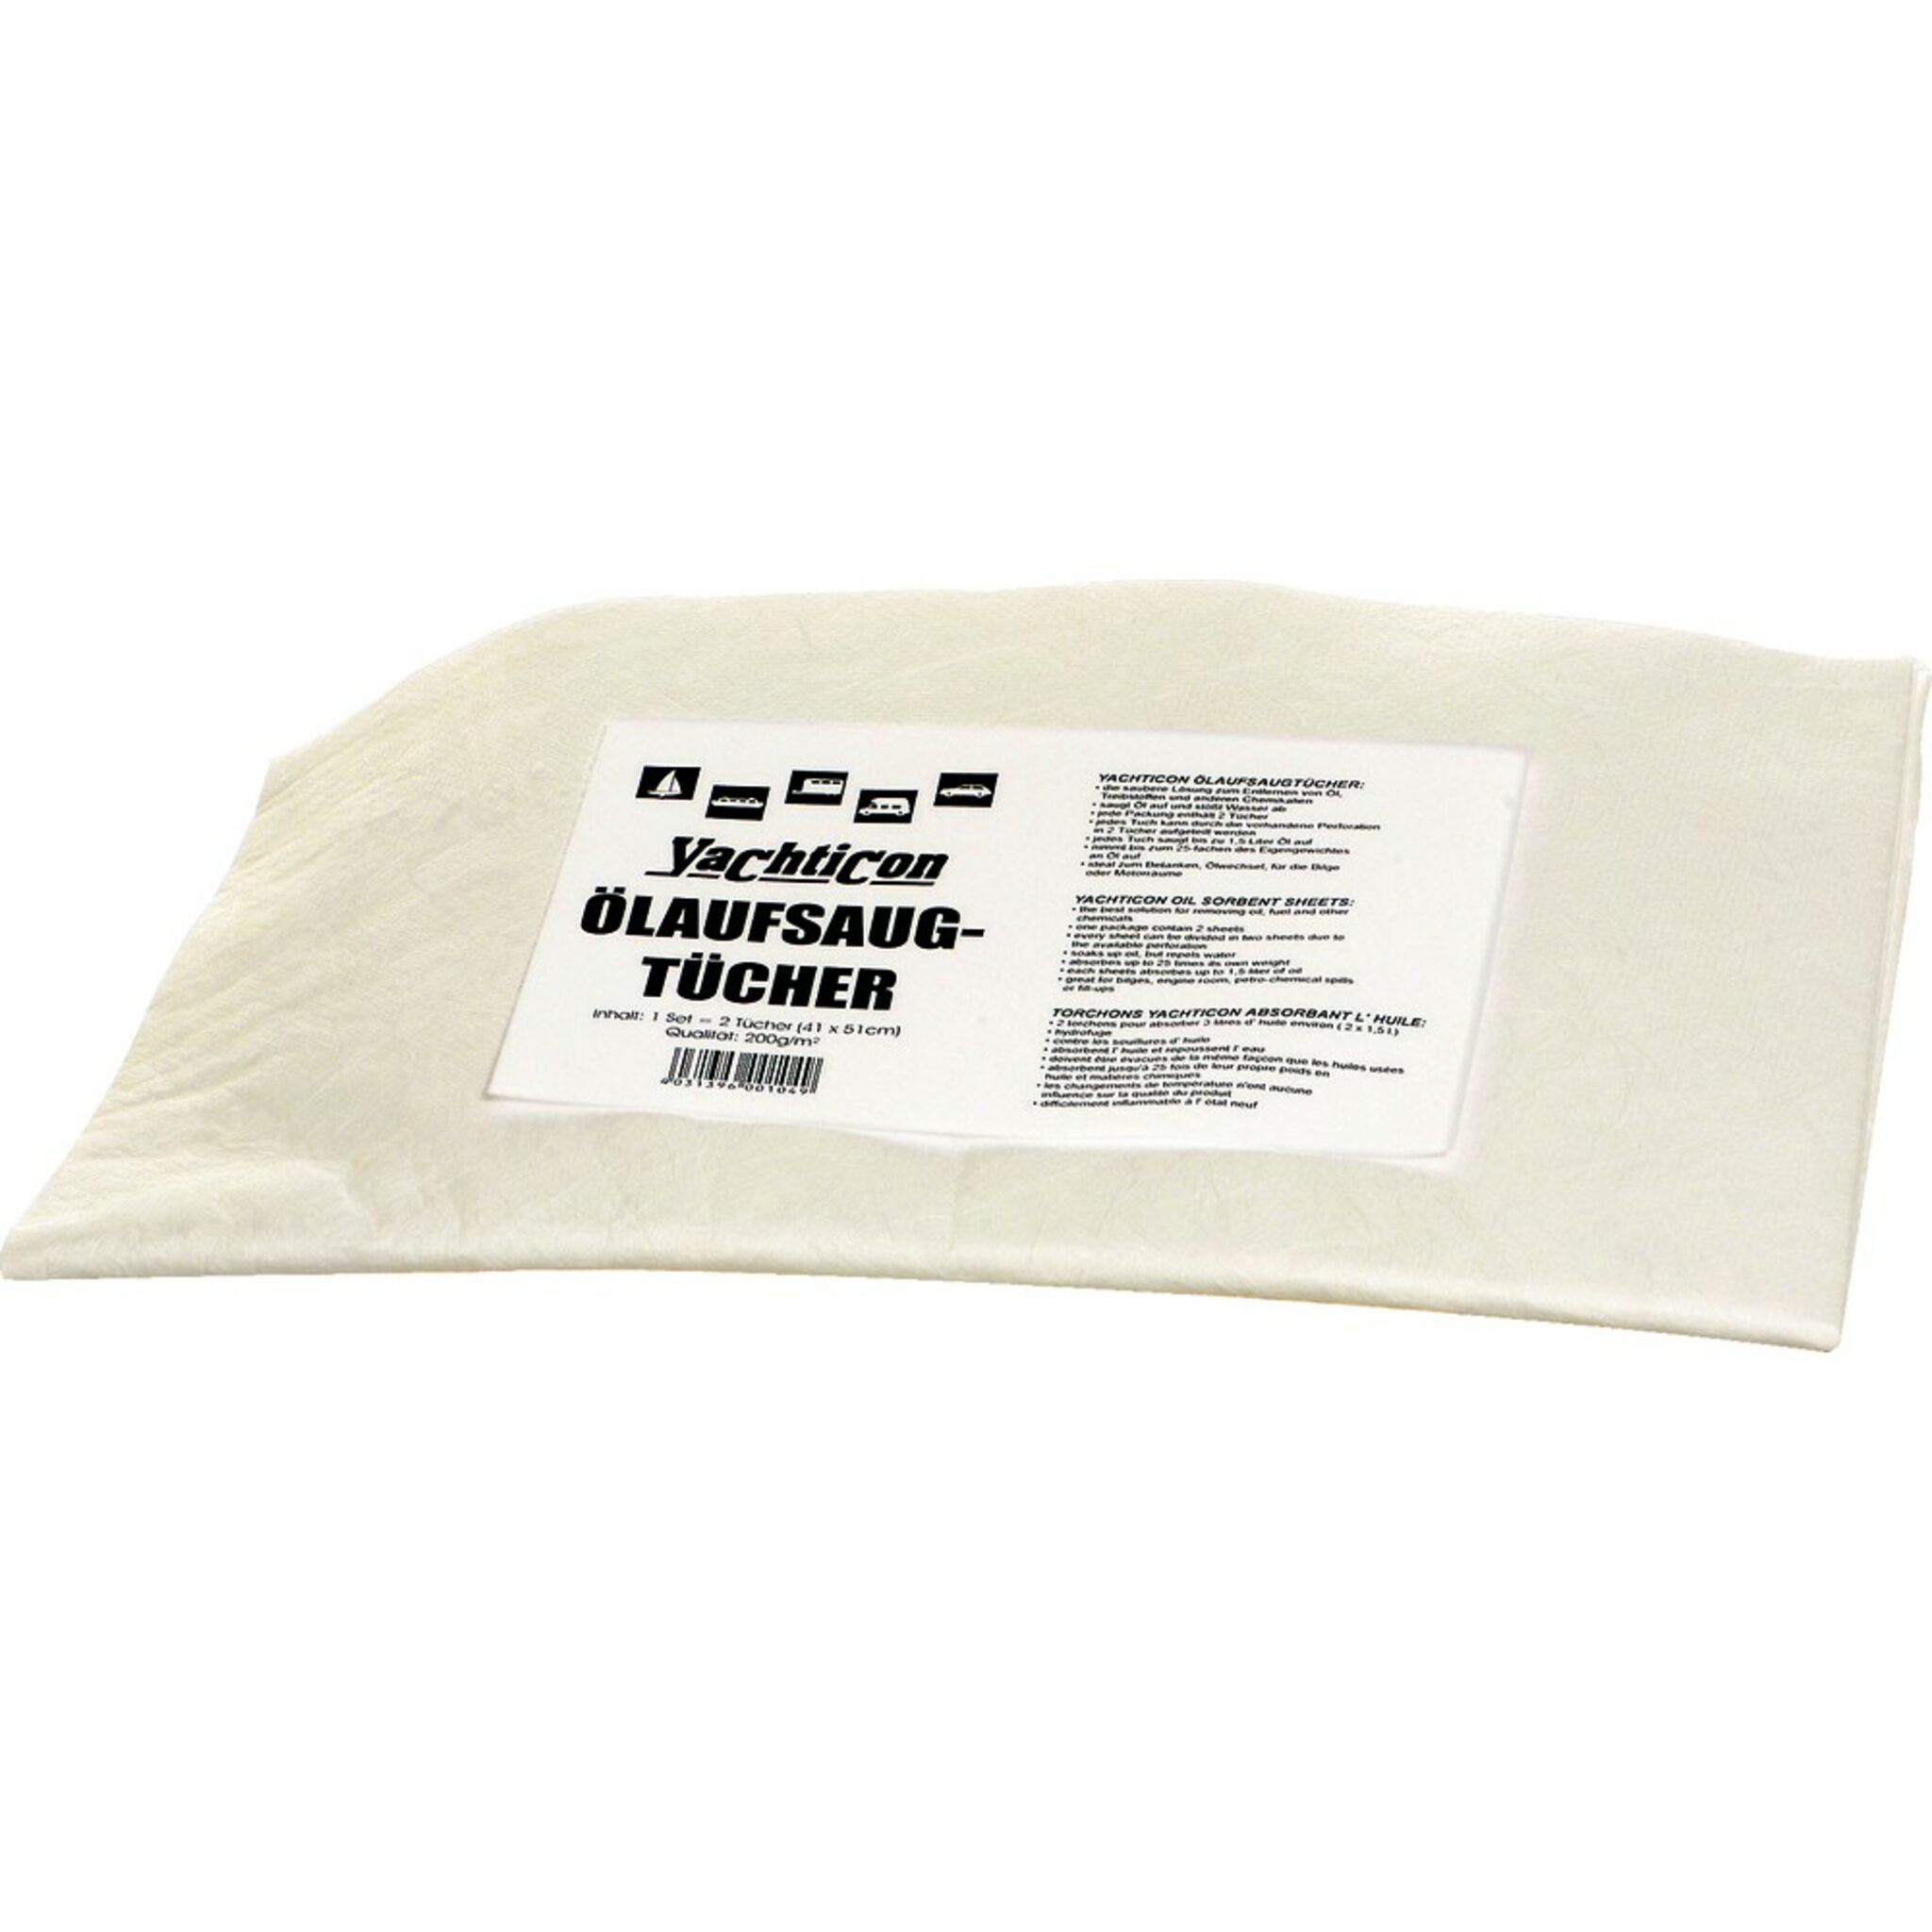 Yachticon oil absorbent cloths